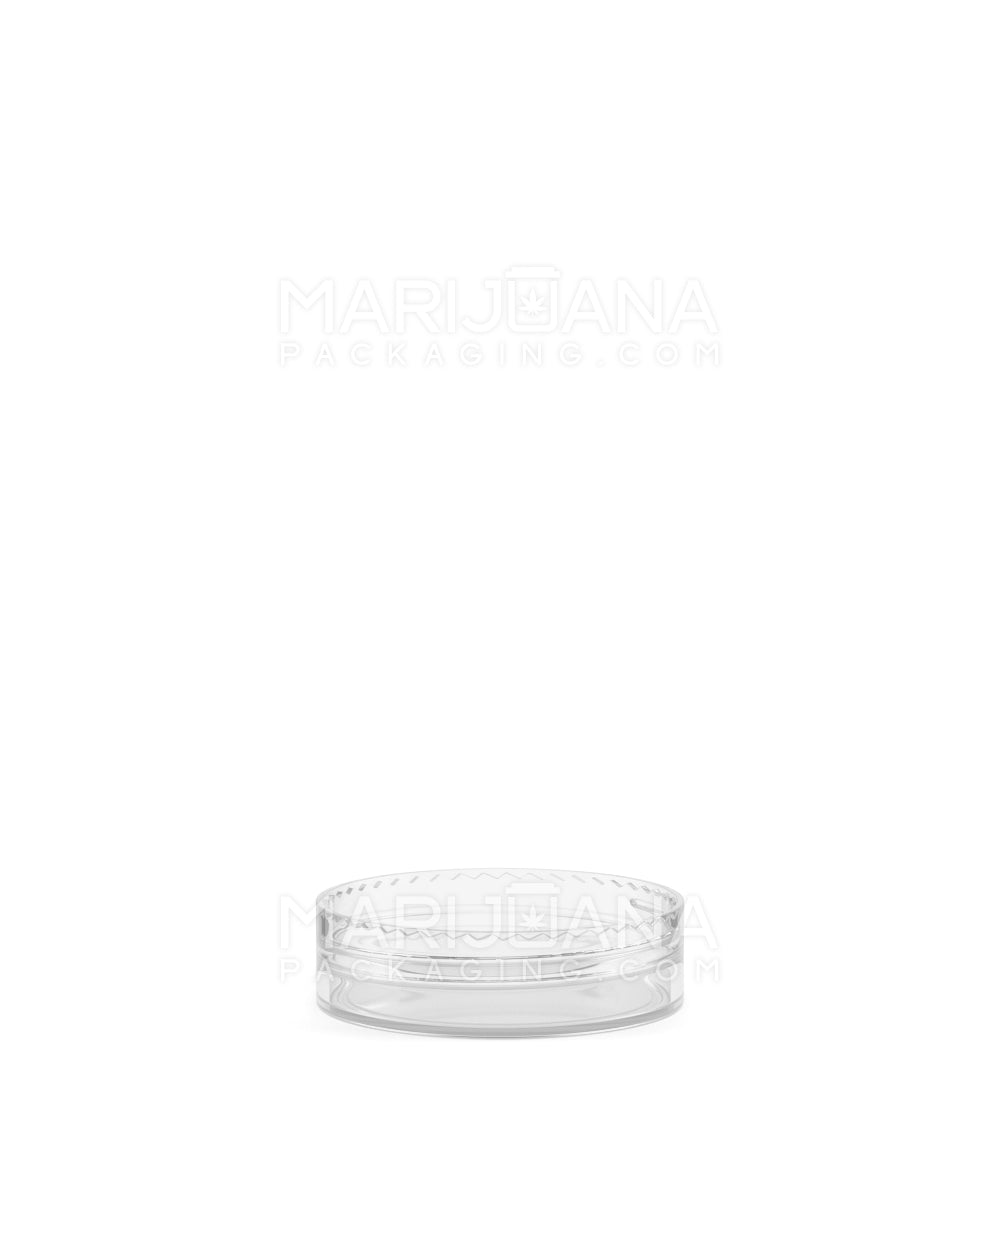 Clear Concentrate Containers w/ Screw Top Cap & White Silicone Insert | 7mL - Plastic - 100 Count - 13